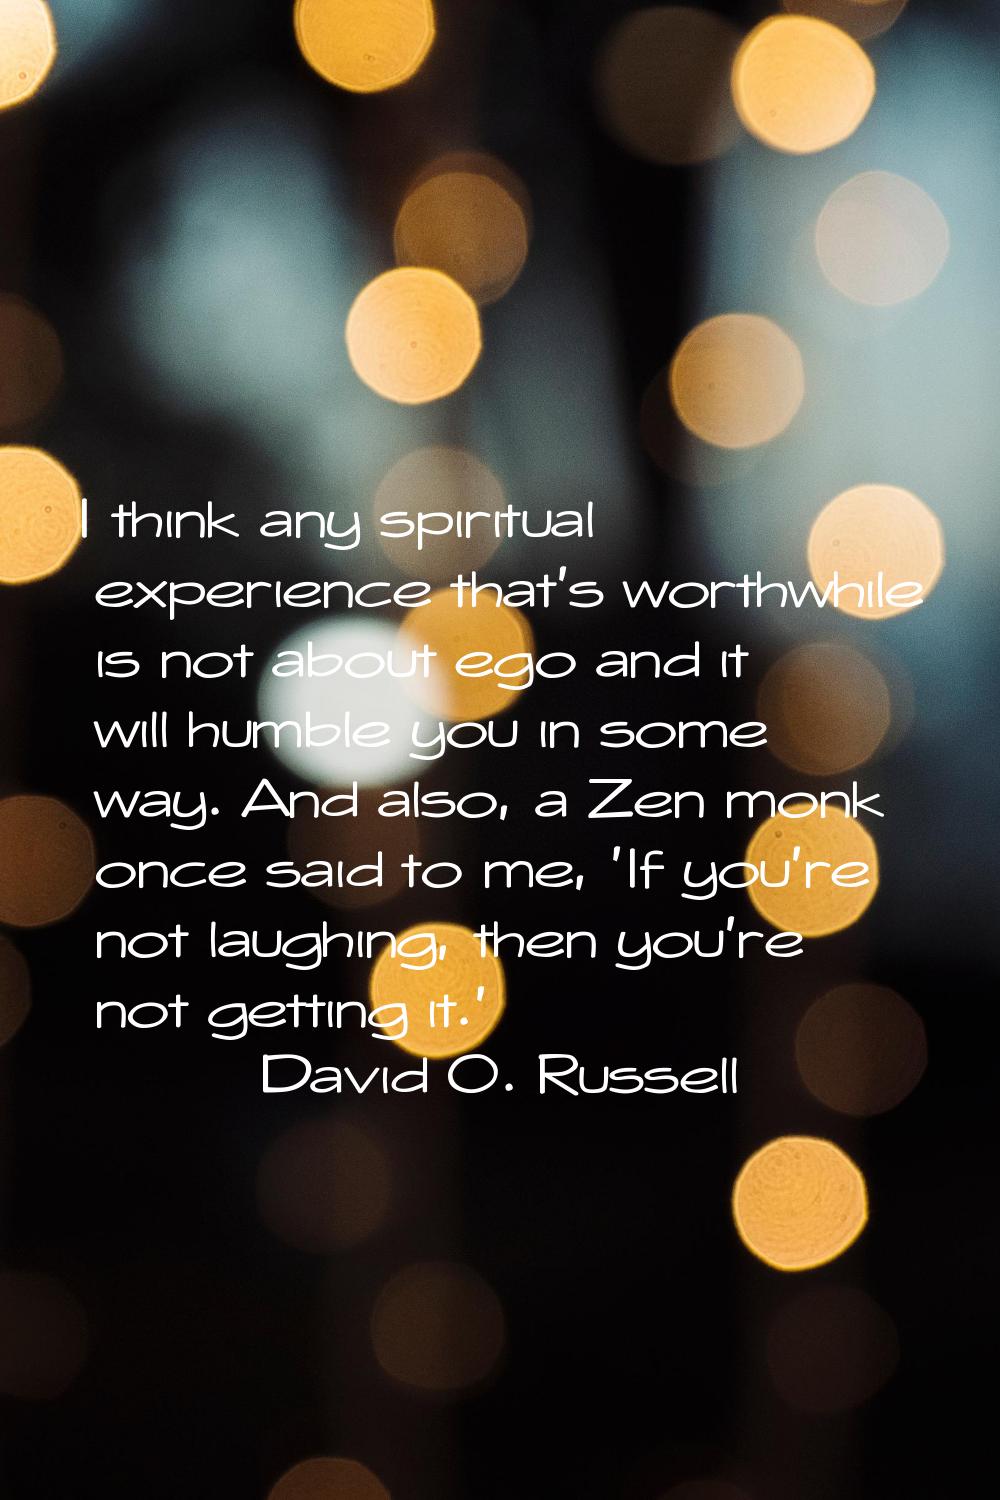 I think any spiritual experience that's worthwhile is not about ego and it will humble you in some 